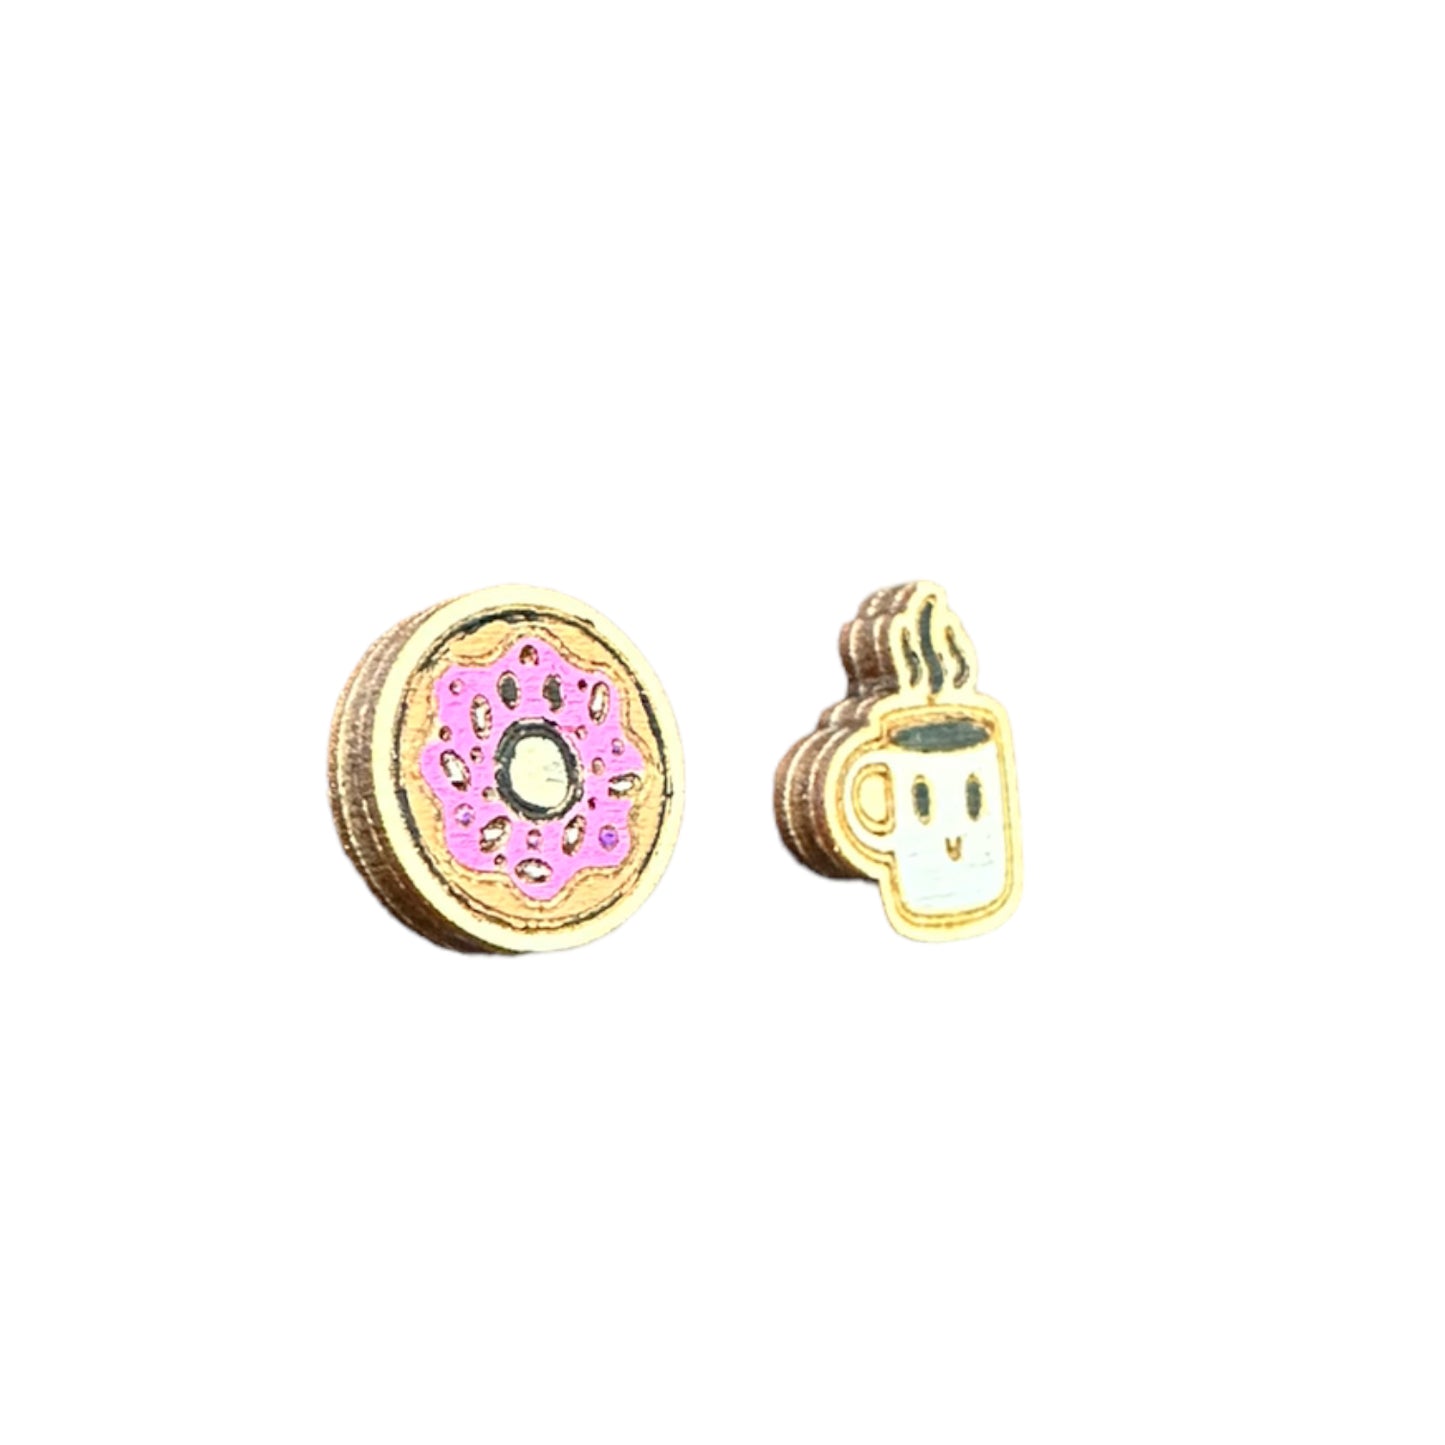 Hypoallergenic Hand Painted Coffee and Donut Laser Engraved Wood Stud Earrings